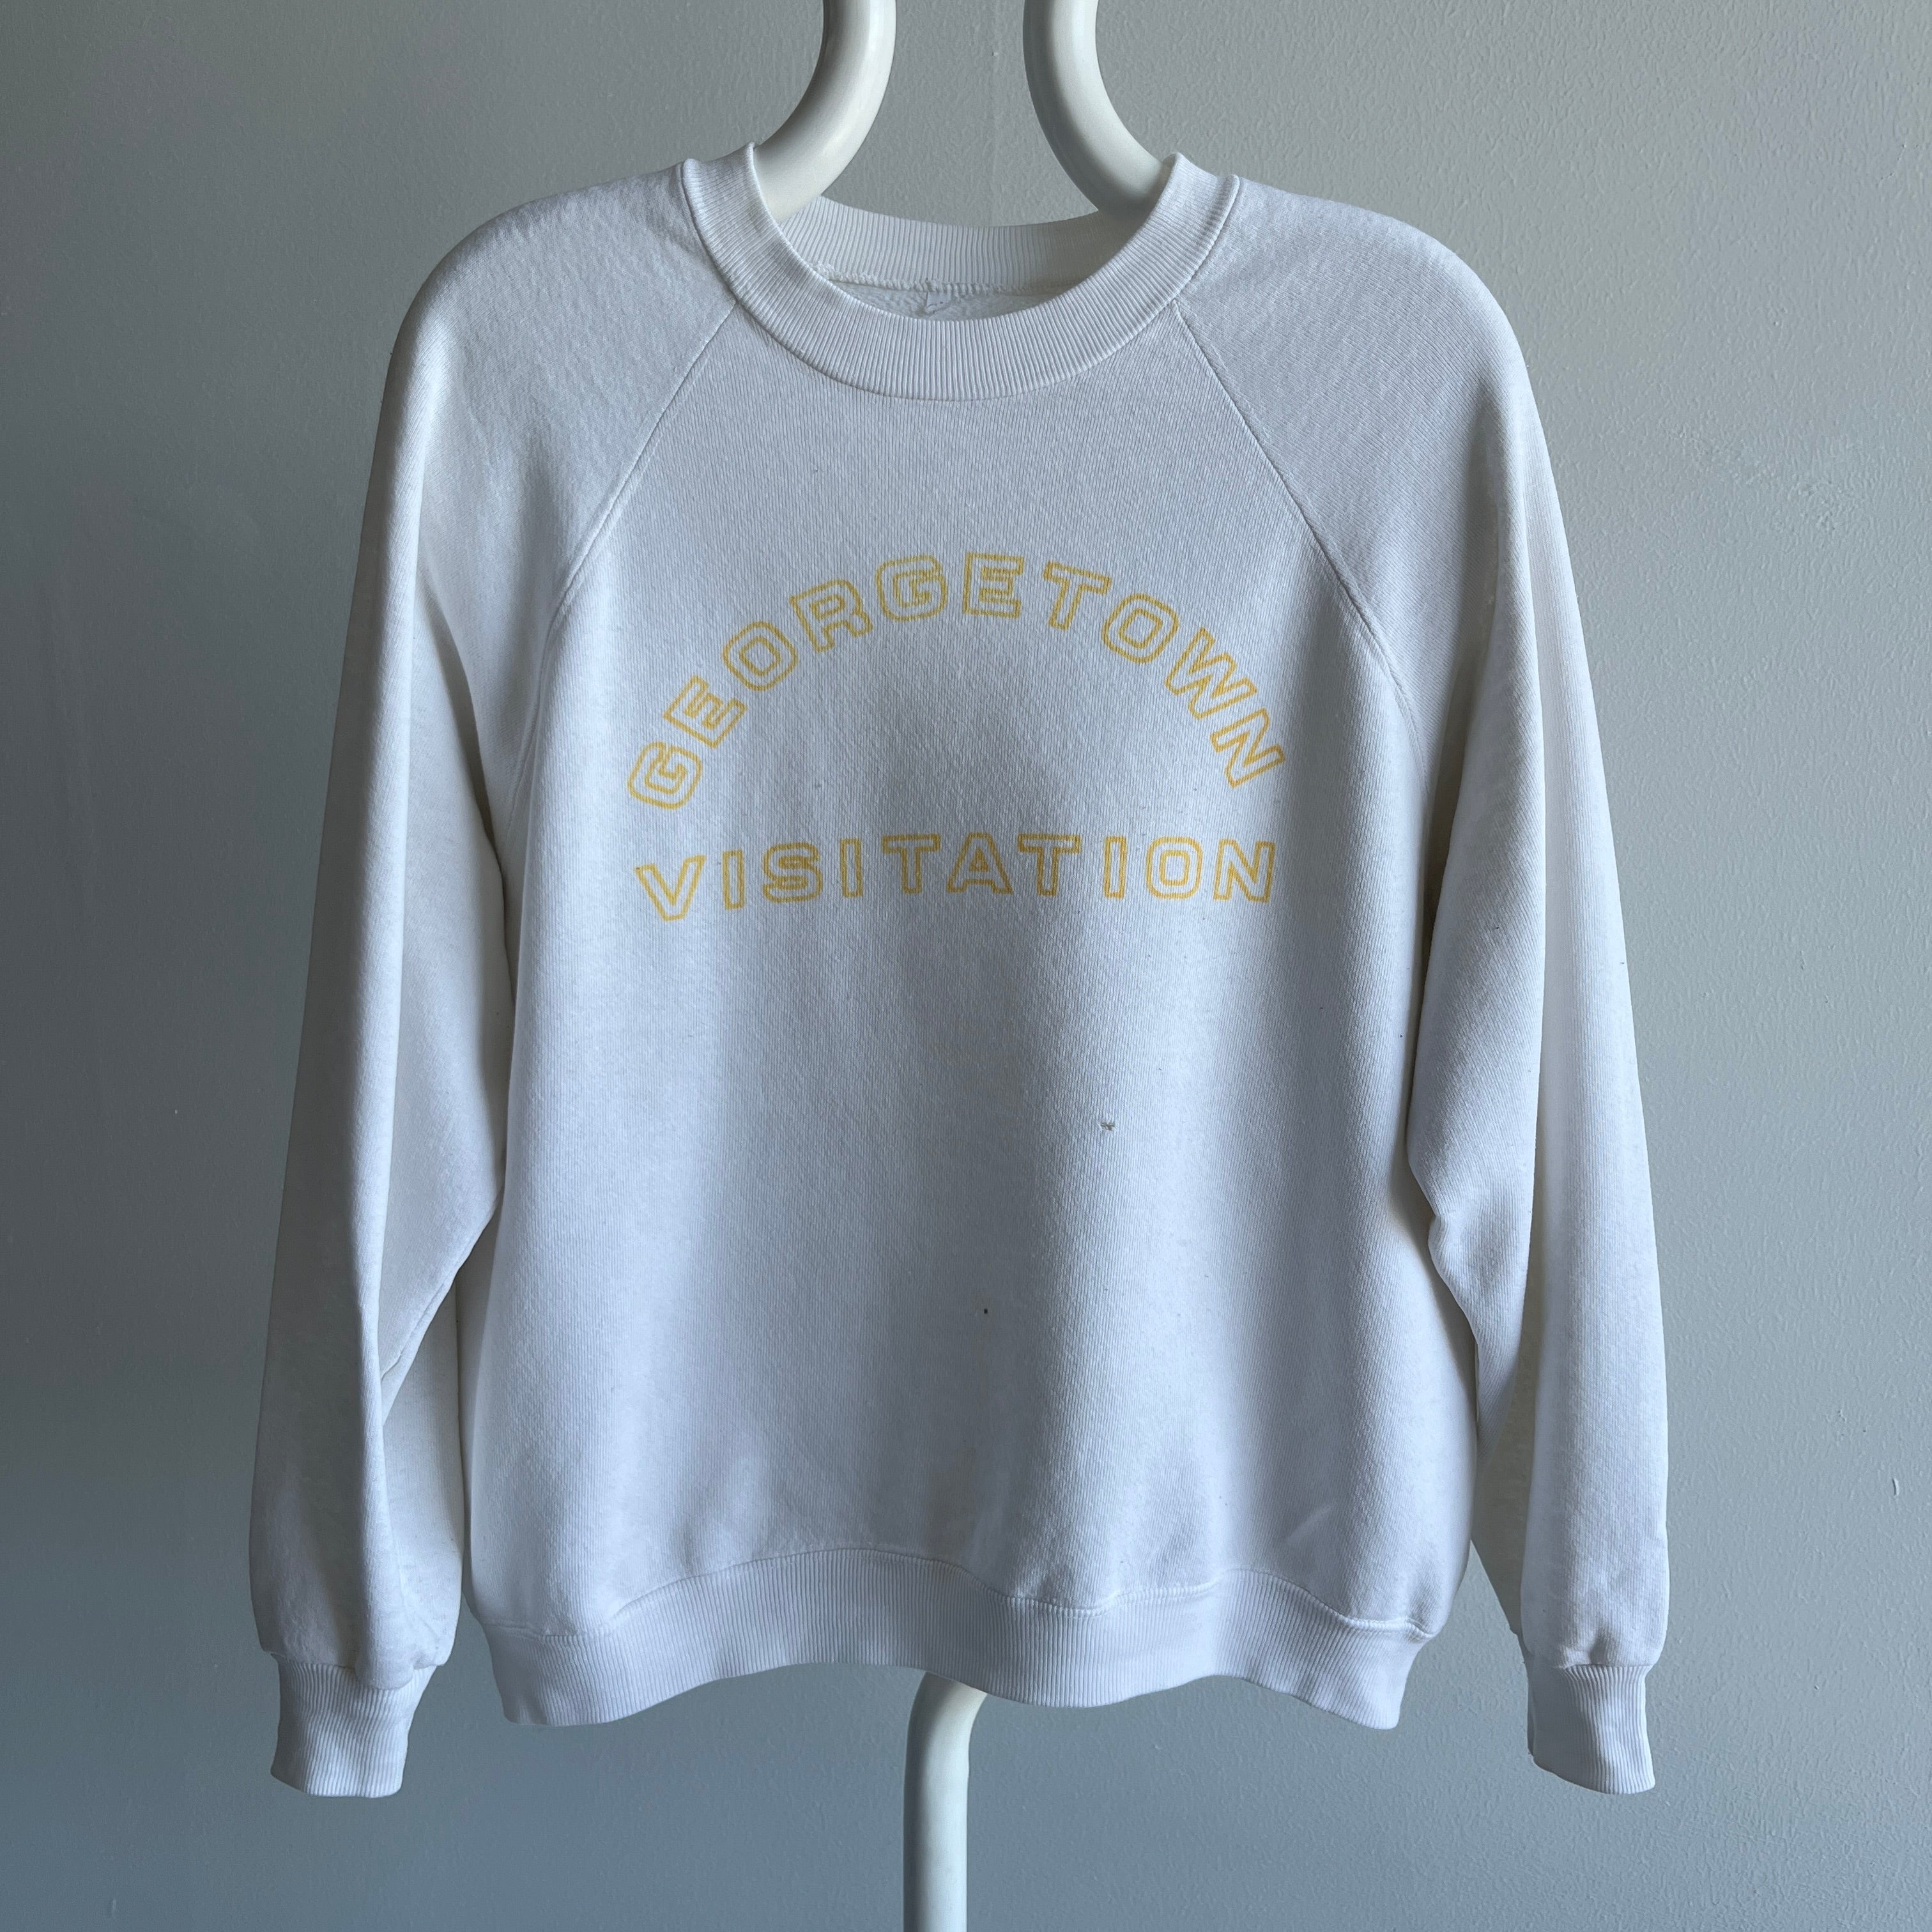 1980s Thinned Out Beyond Georgetown Visitation Sweatshirt